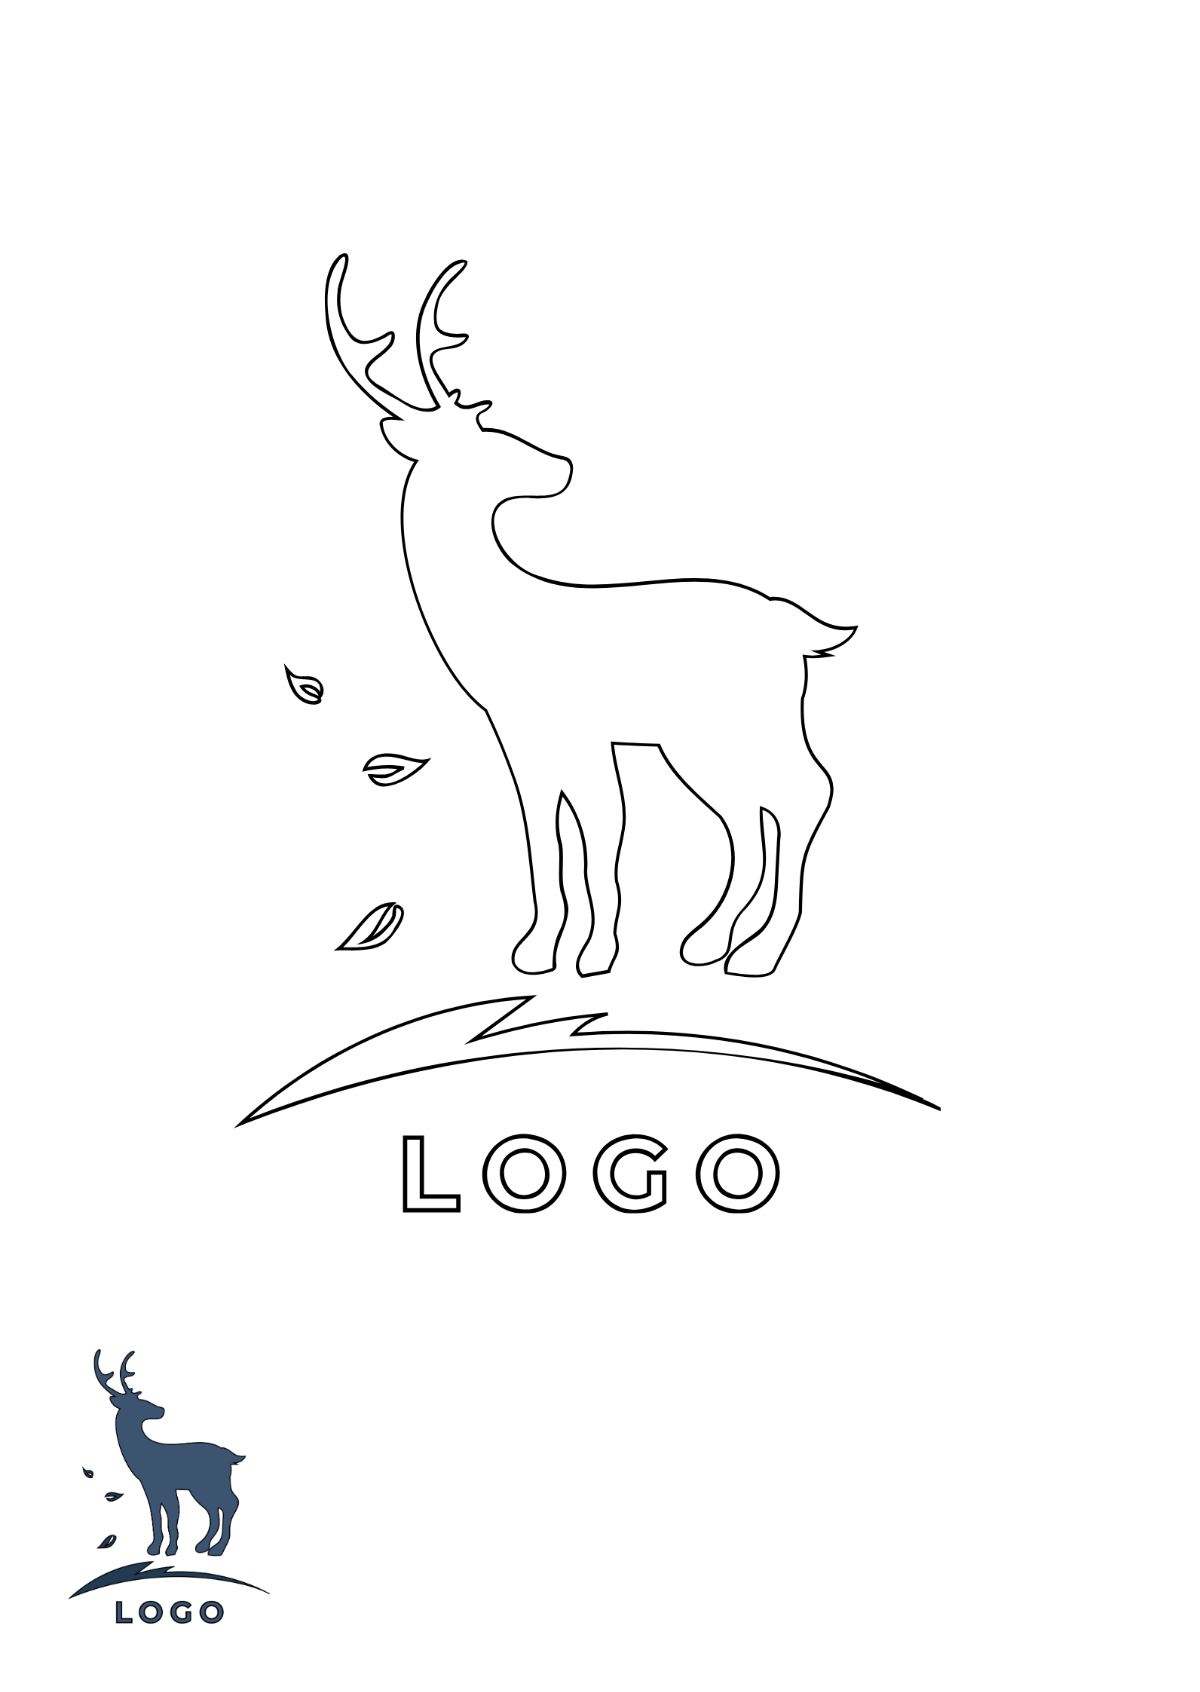 Free Deer Logo Coloring Page Template